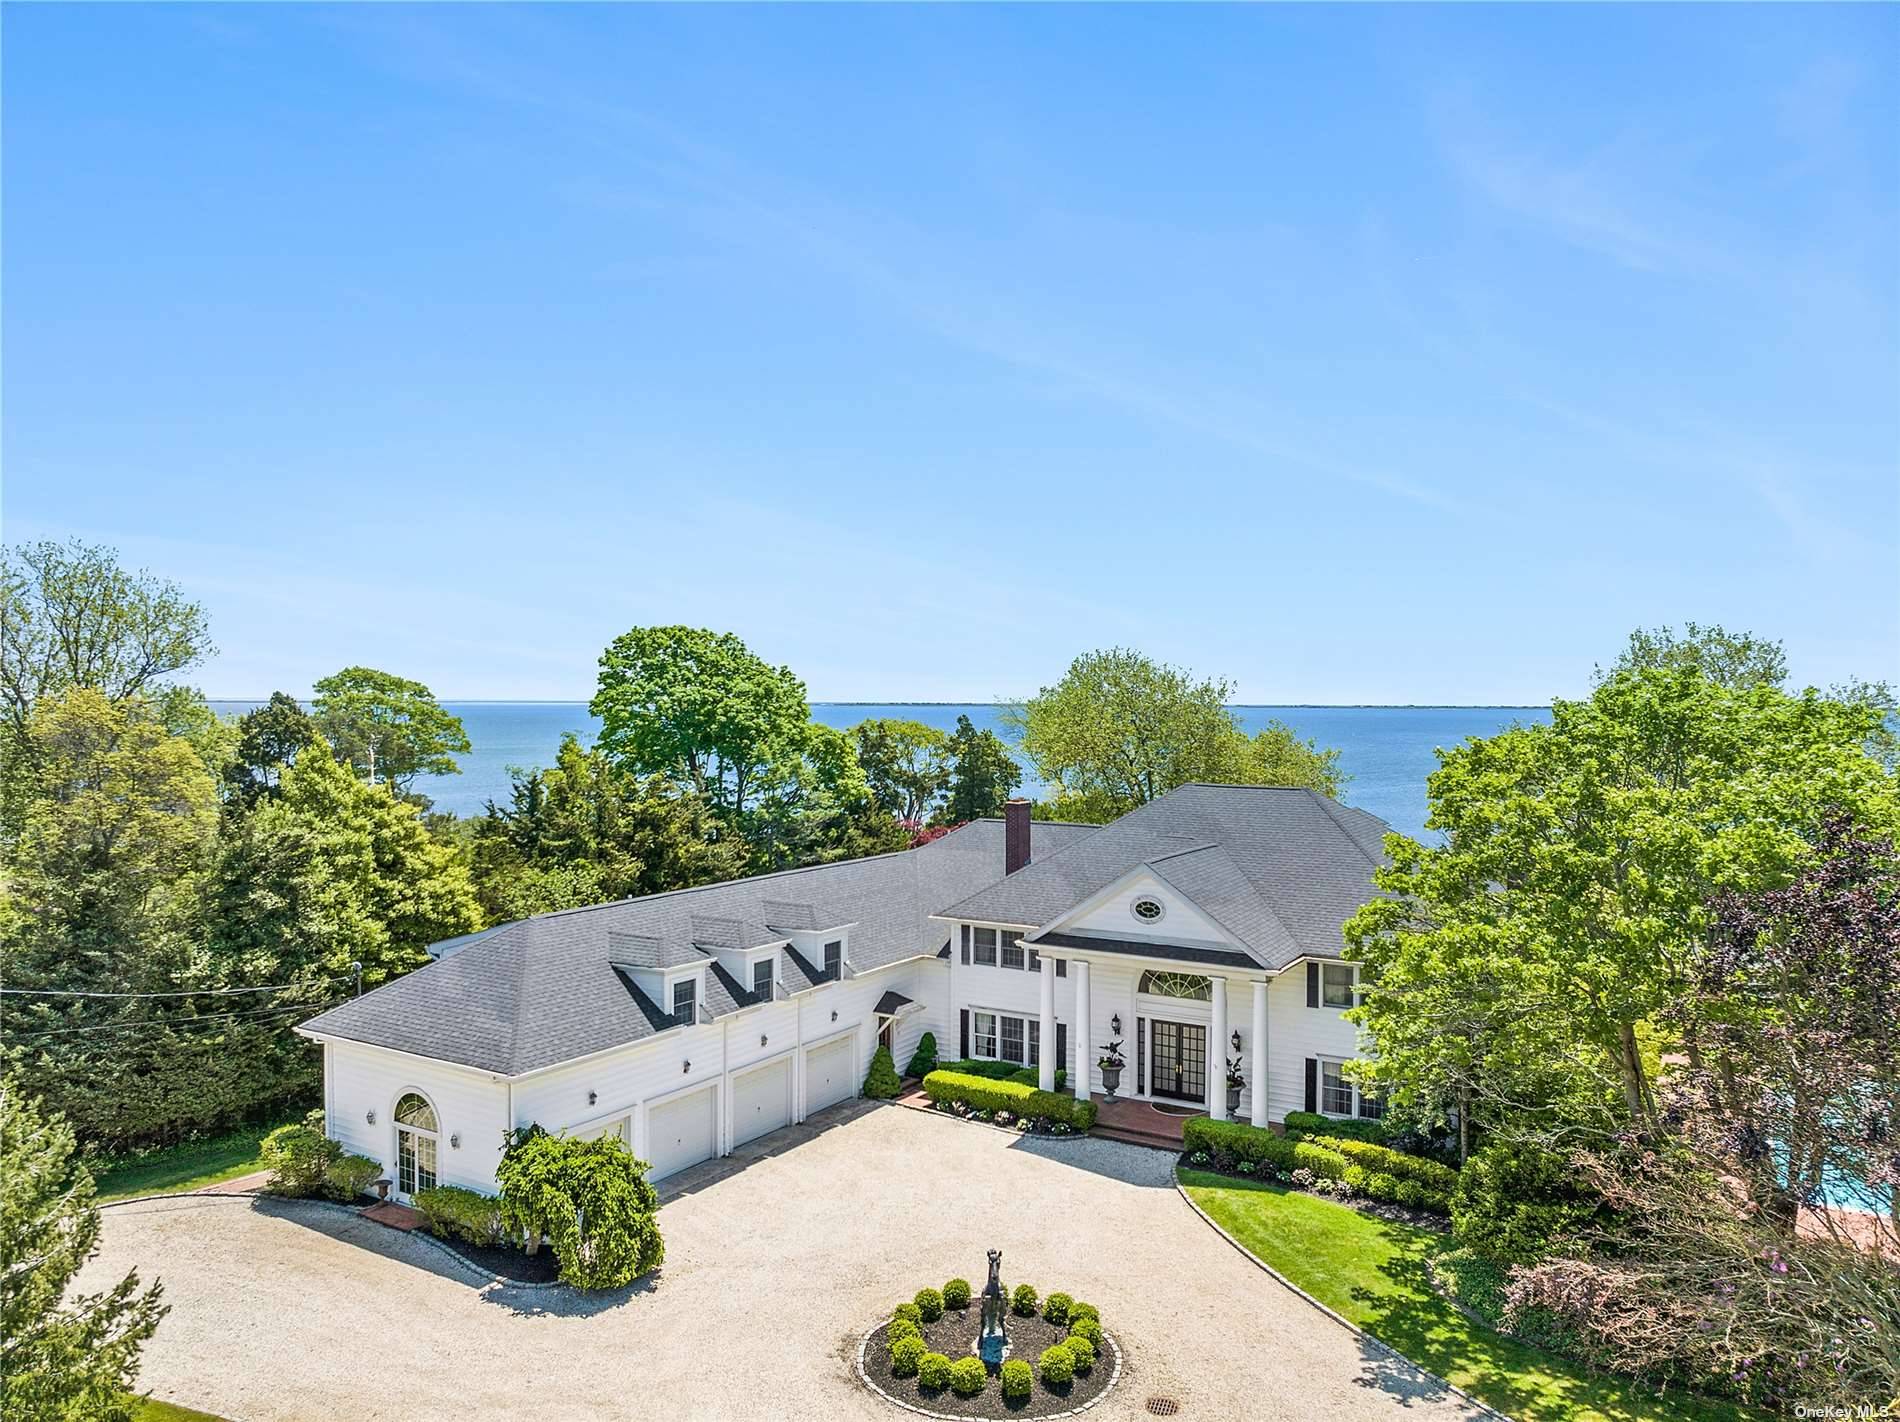 Welcome to Bay Breeze, the stunning waterfront estate in the Village of Bellport.